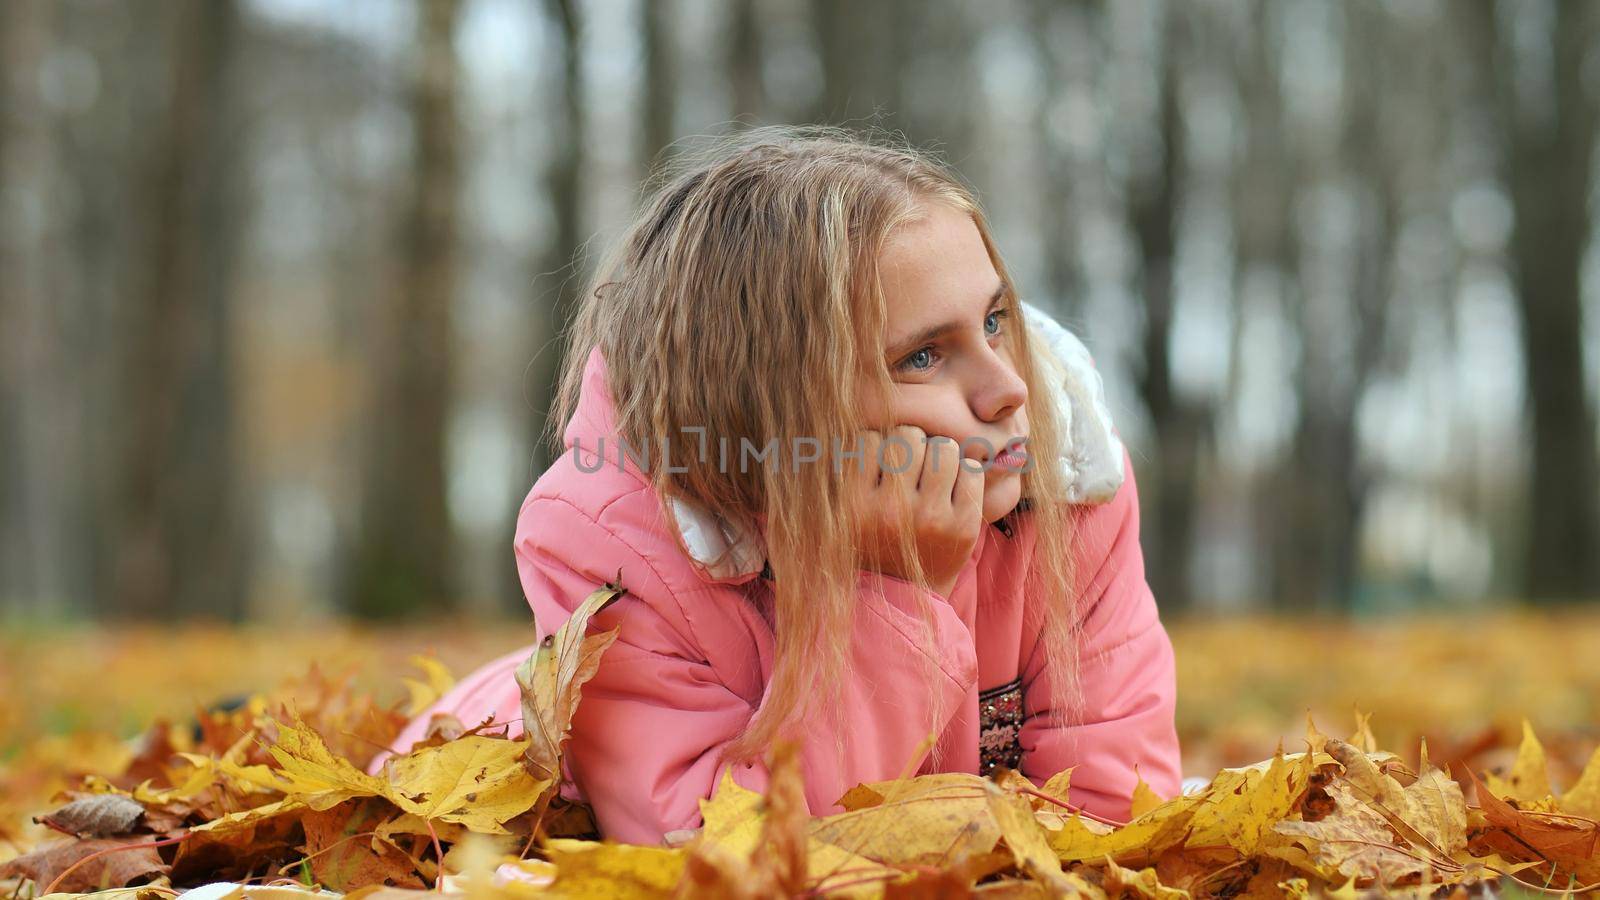 A little girl indifferently lies on the autumn foliage in a city park. She is very sad